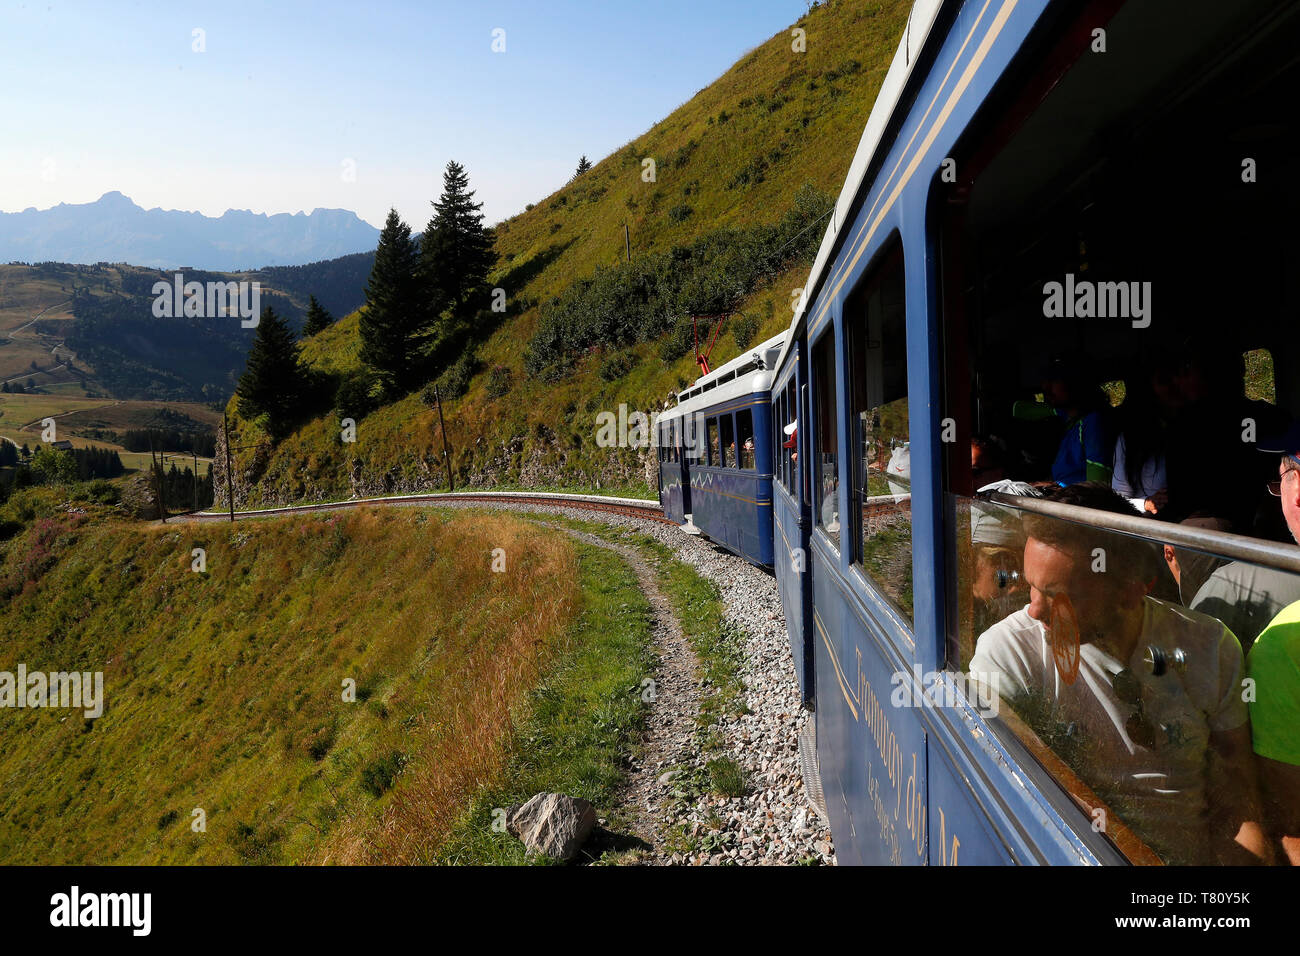 The Mont Blanc Tramway (TMB), the highest mountain railway line in France, French Alps, Saint-Gervais, Haute-Savoie, France, Europe Stock Photo